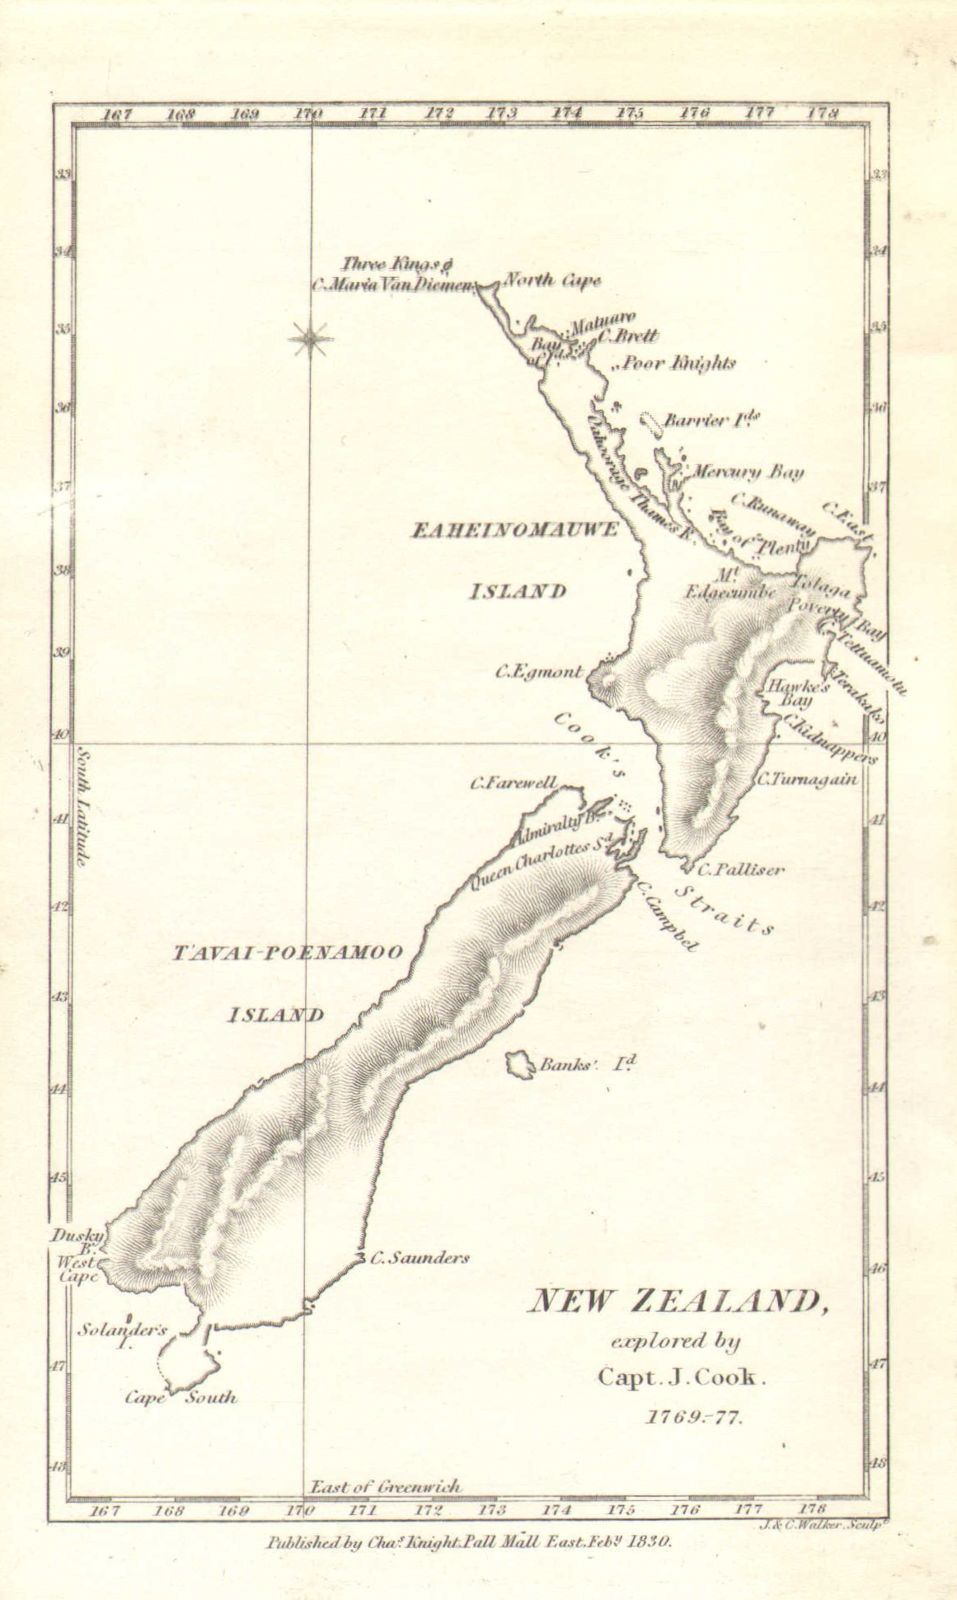 Associate Product 'New Zealand explored by Capt. J. Cook 1769-77'. Small early map. KNIGHT 1830